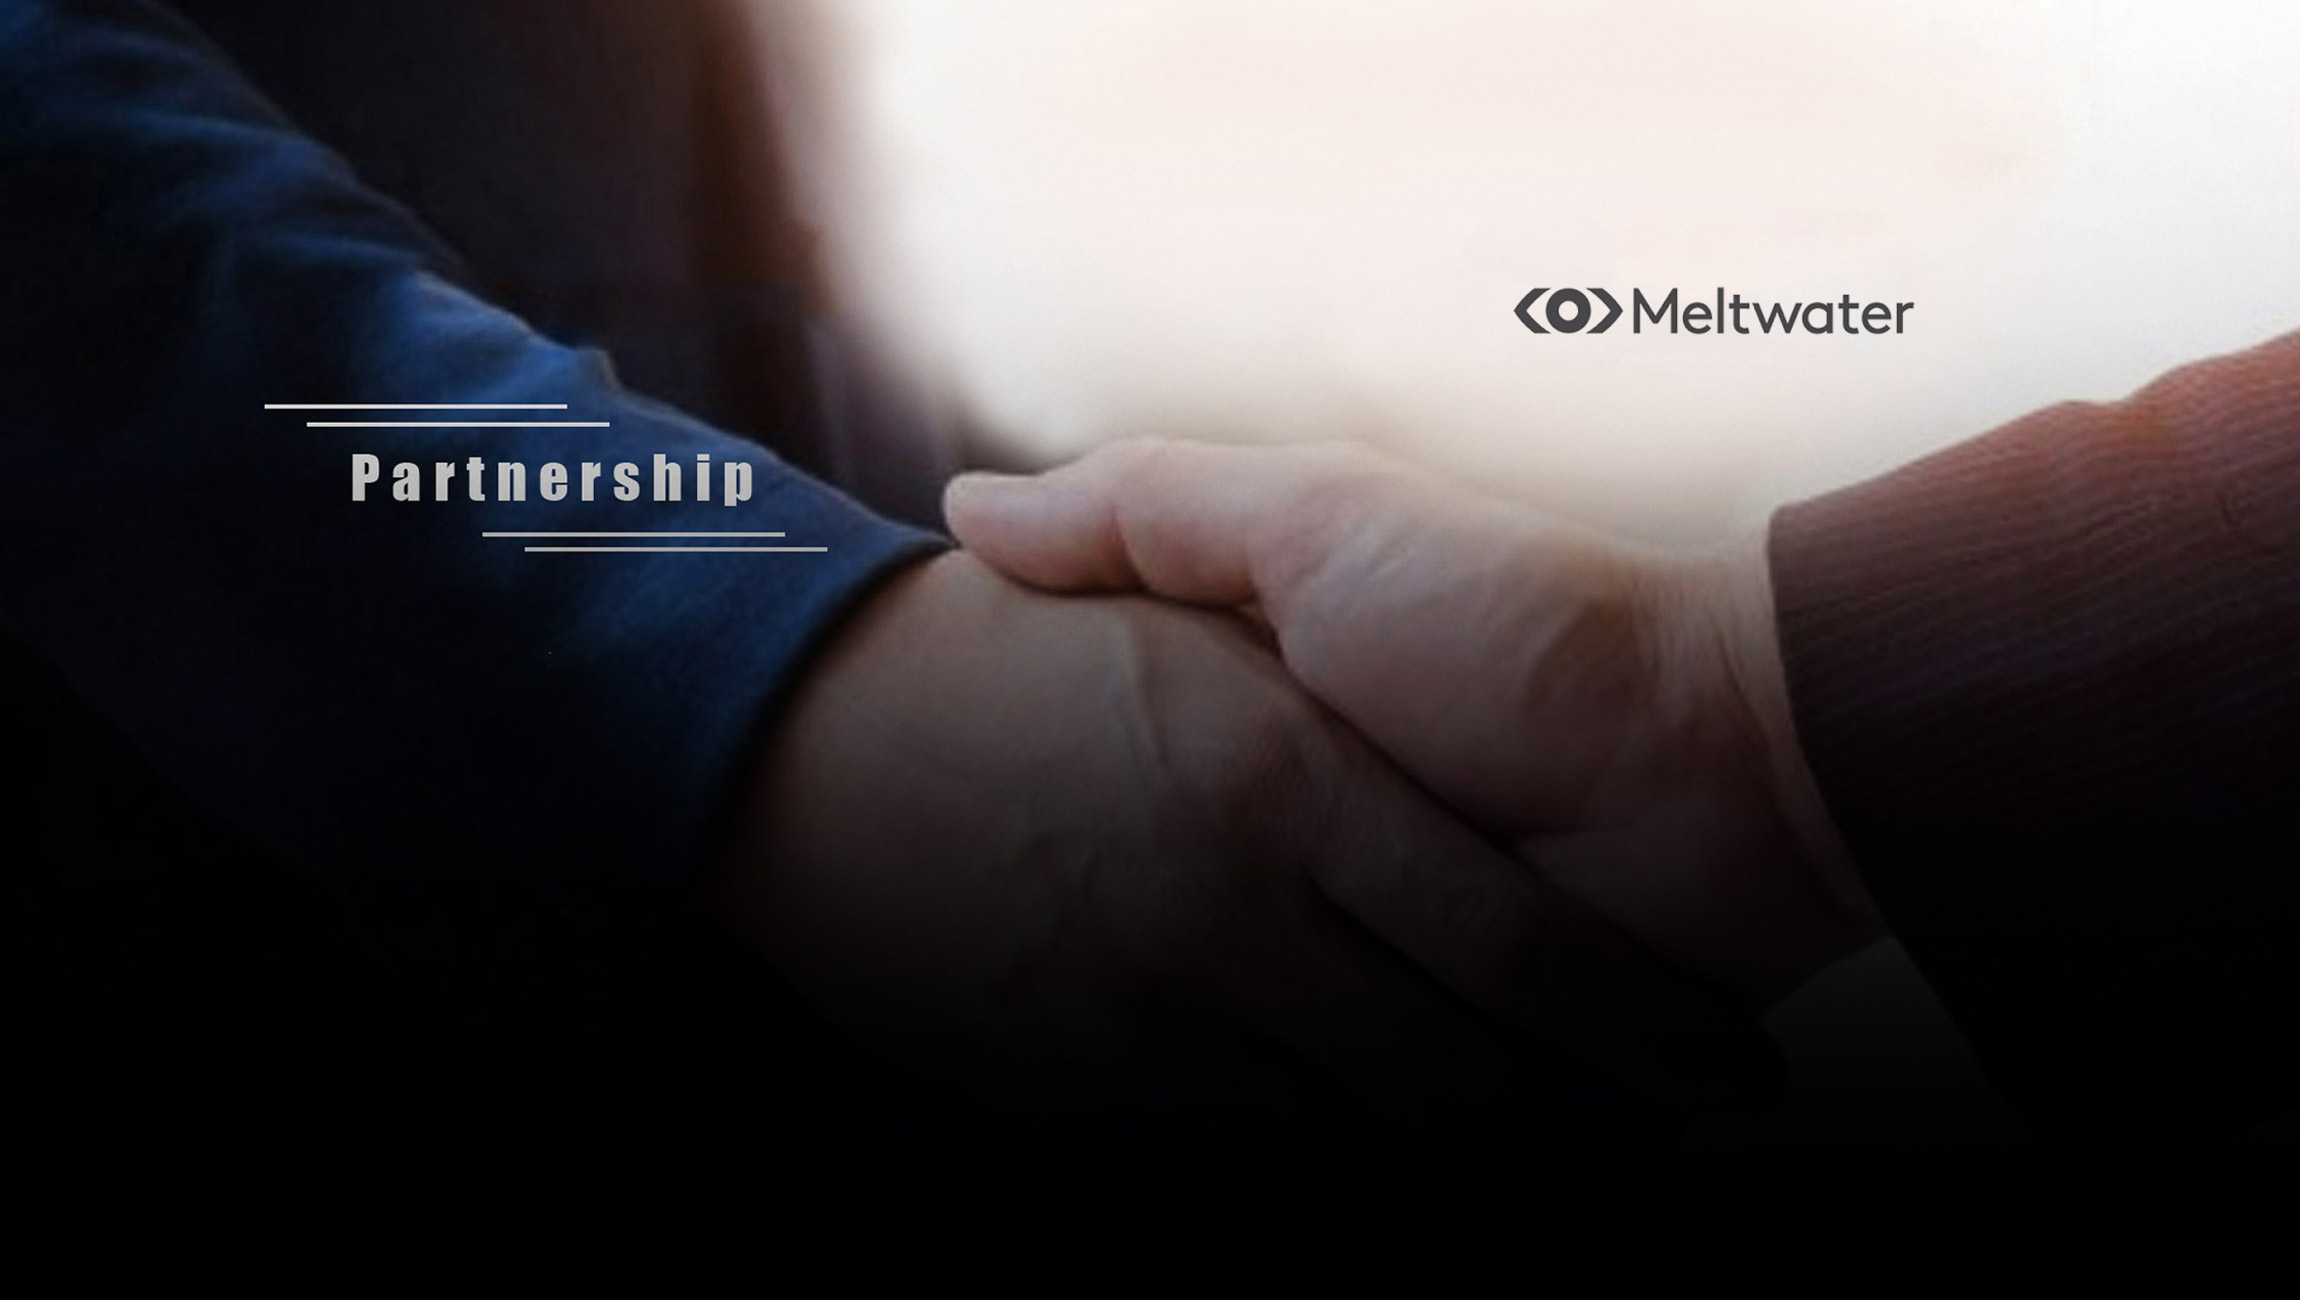 Meltwater becomes title partner of Champions Chess Tour and appoints Magnus Carlsen as Global Brand Ambassador